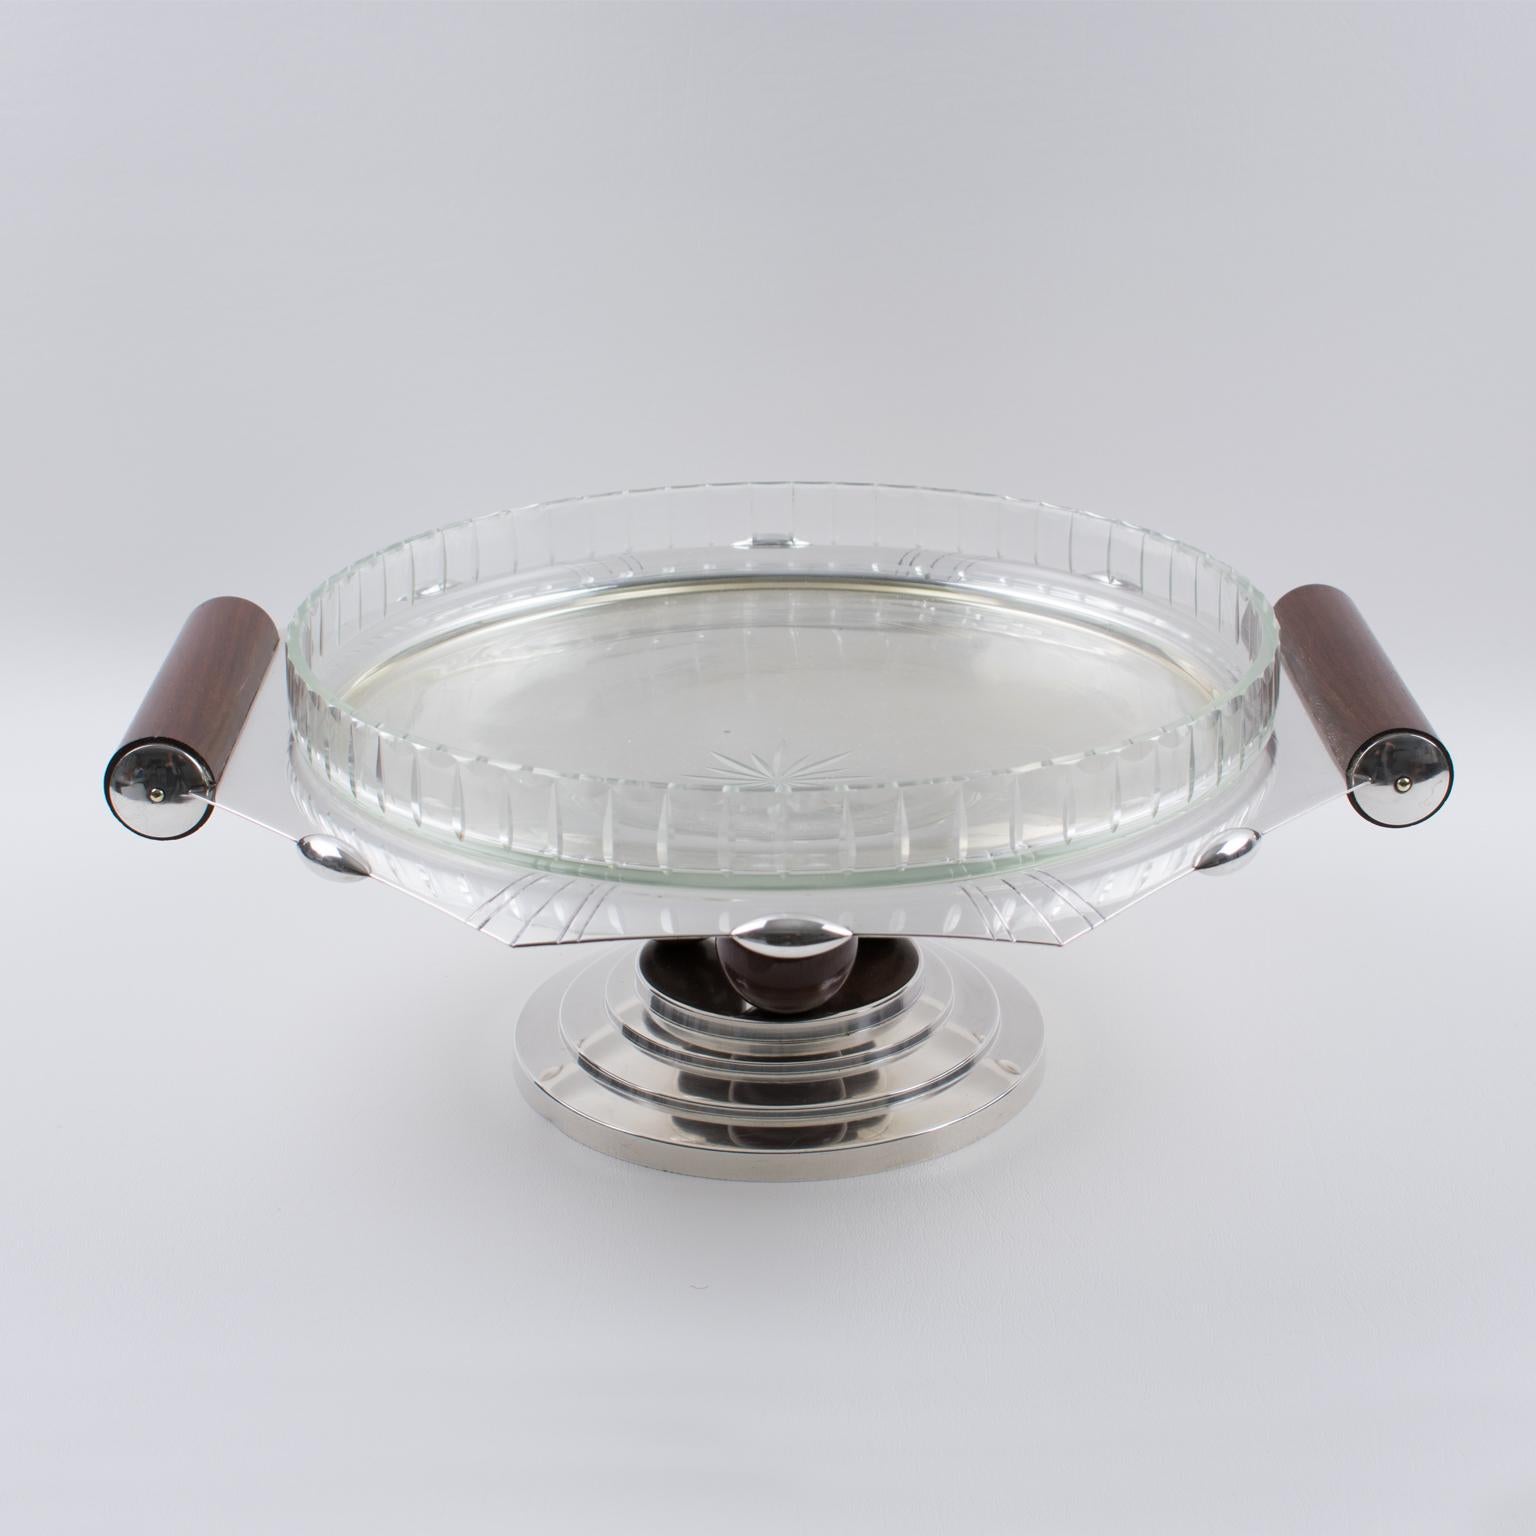 Mid-20th Century Art Deco Roux & Marquiand Silver Plate Crystal Large Serving Bowl Centerpiece